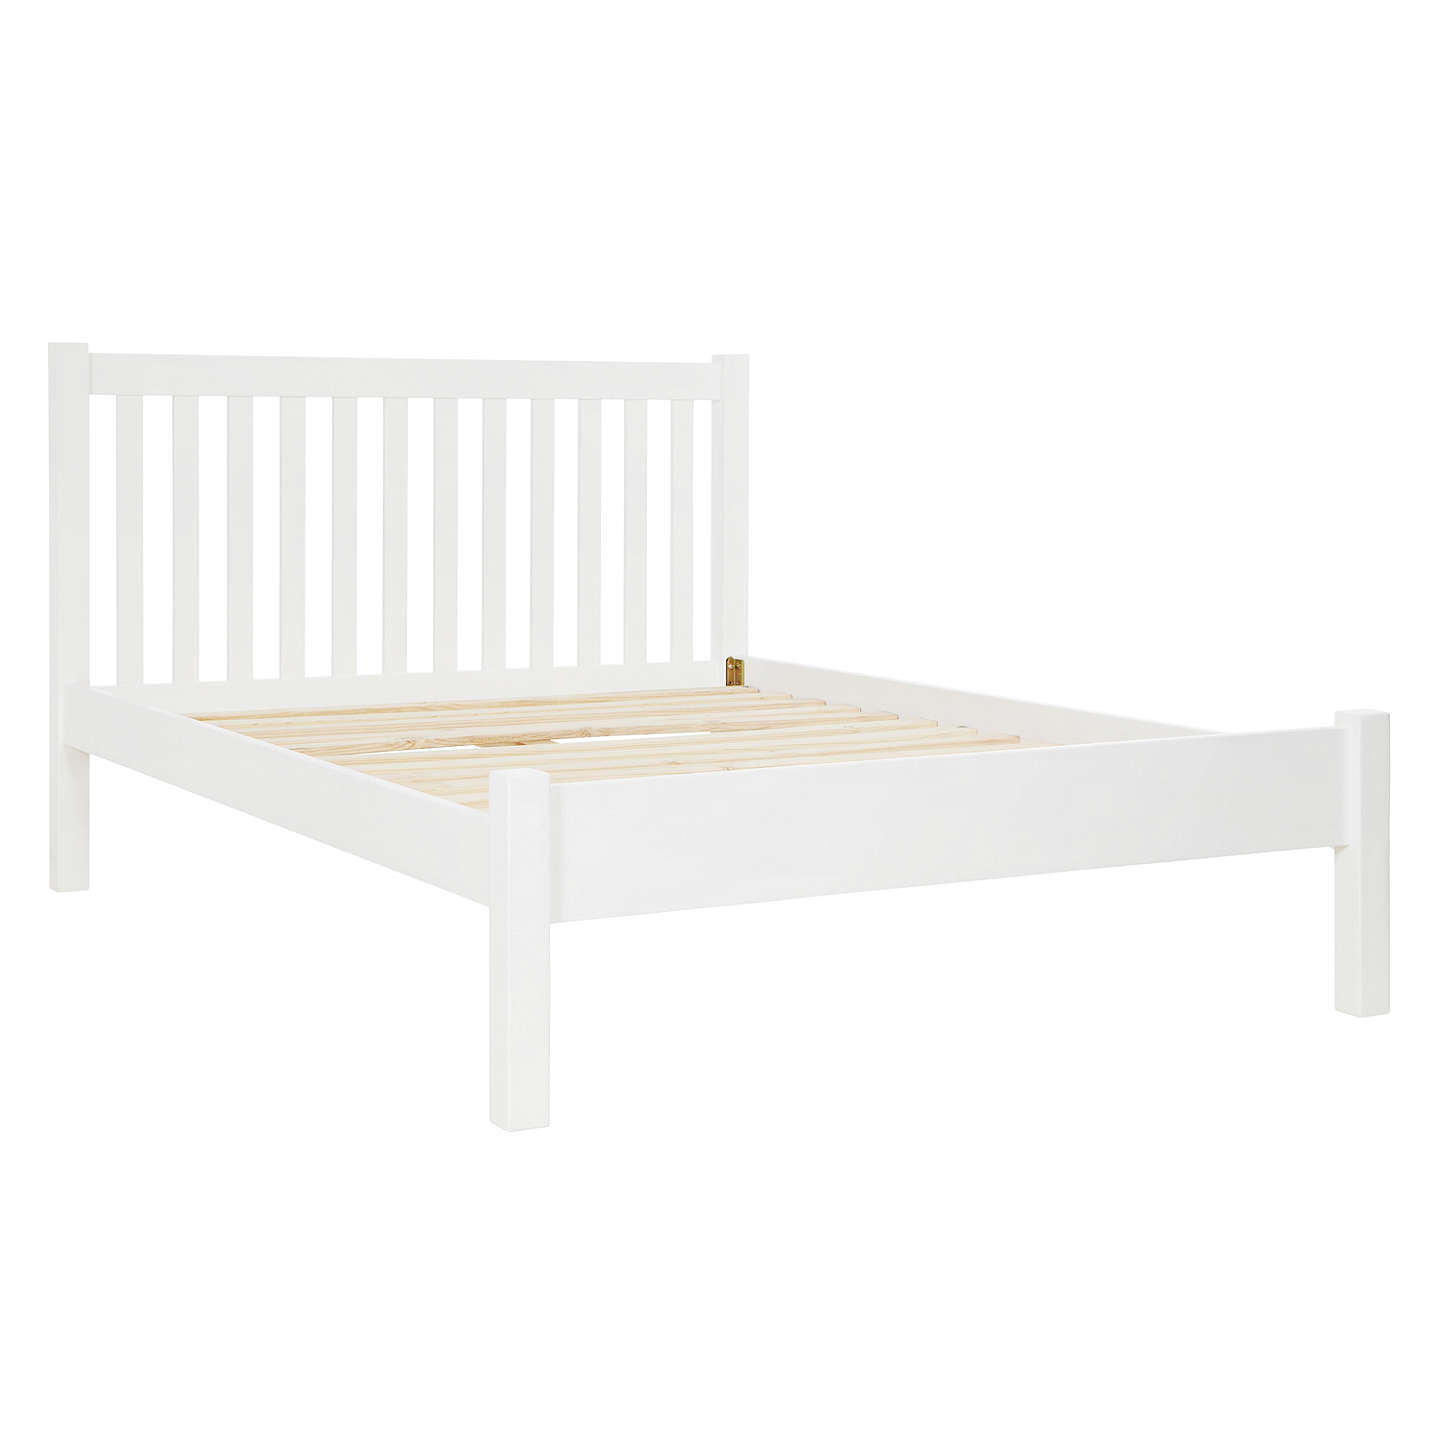 double bed frames buyjohn lewis wilton bed frame, double, white online at johnlewis.com ... HUPMBBL